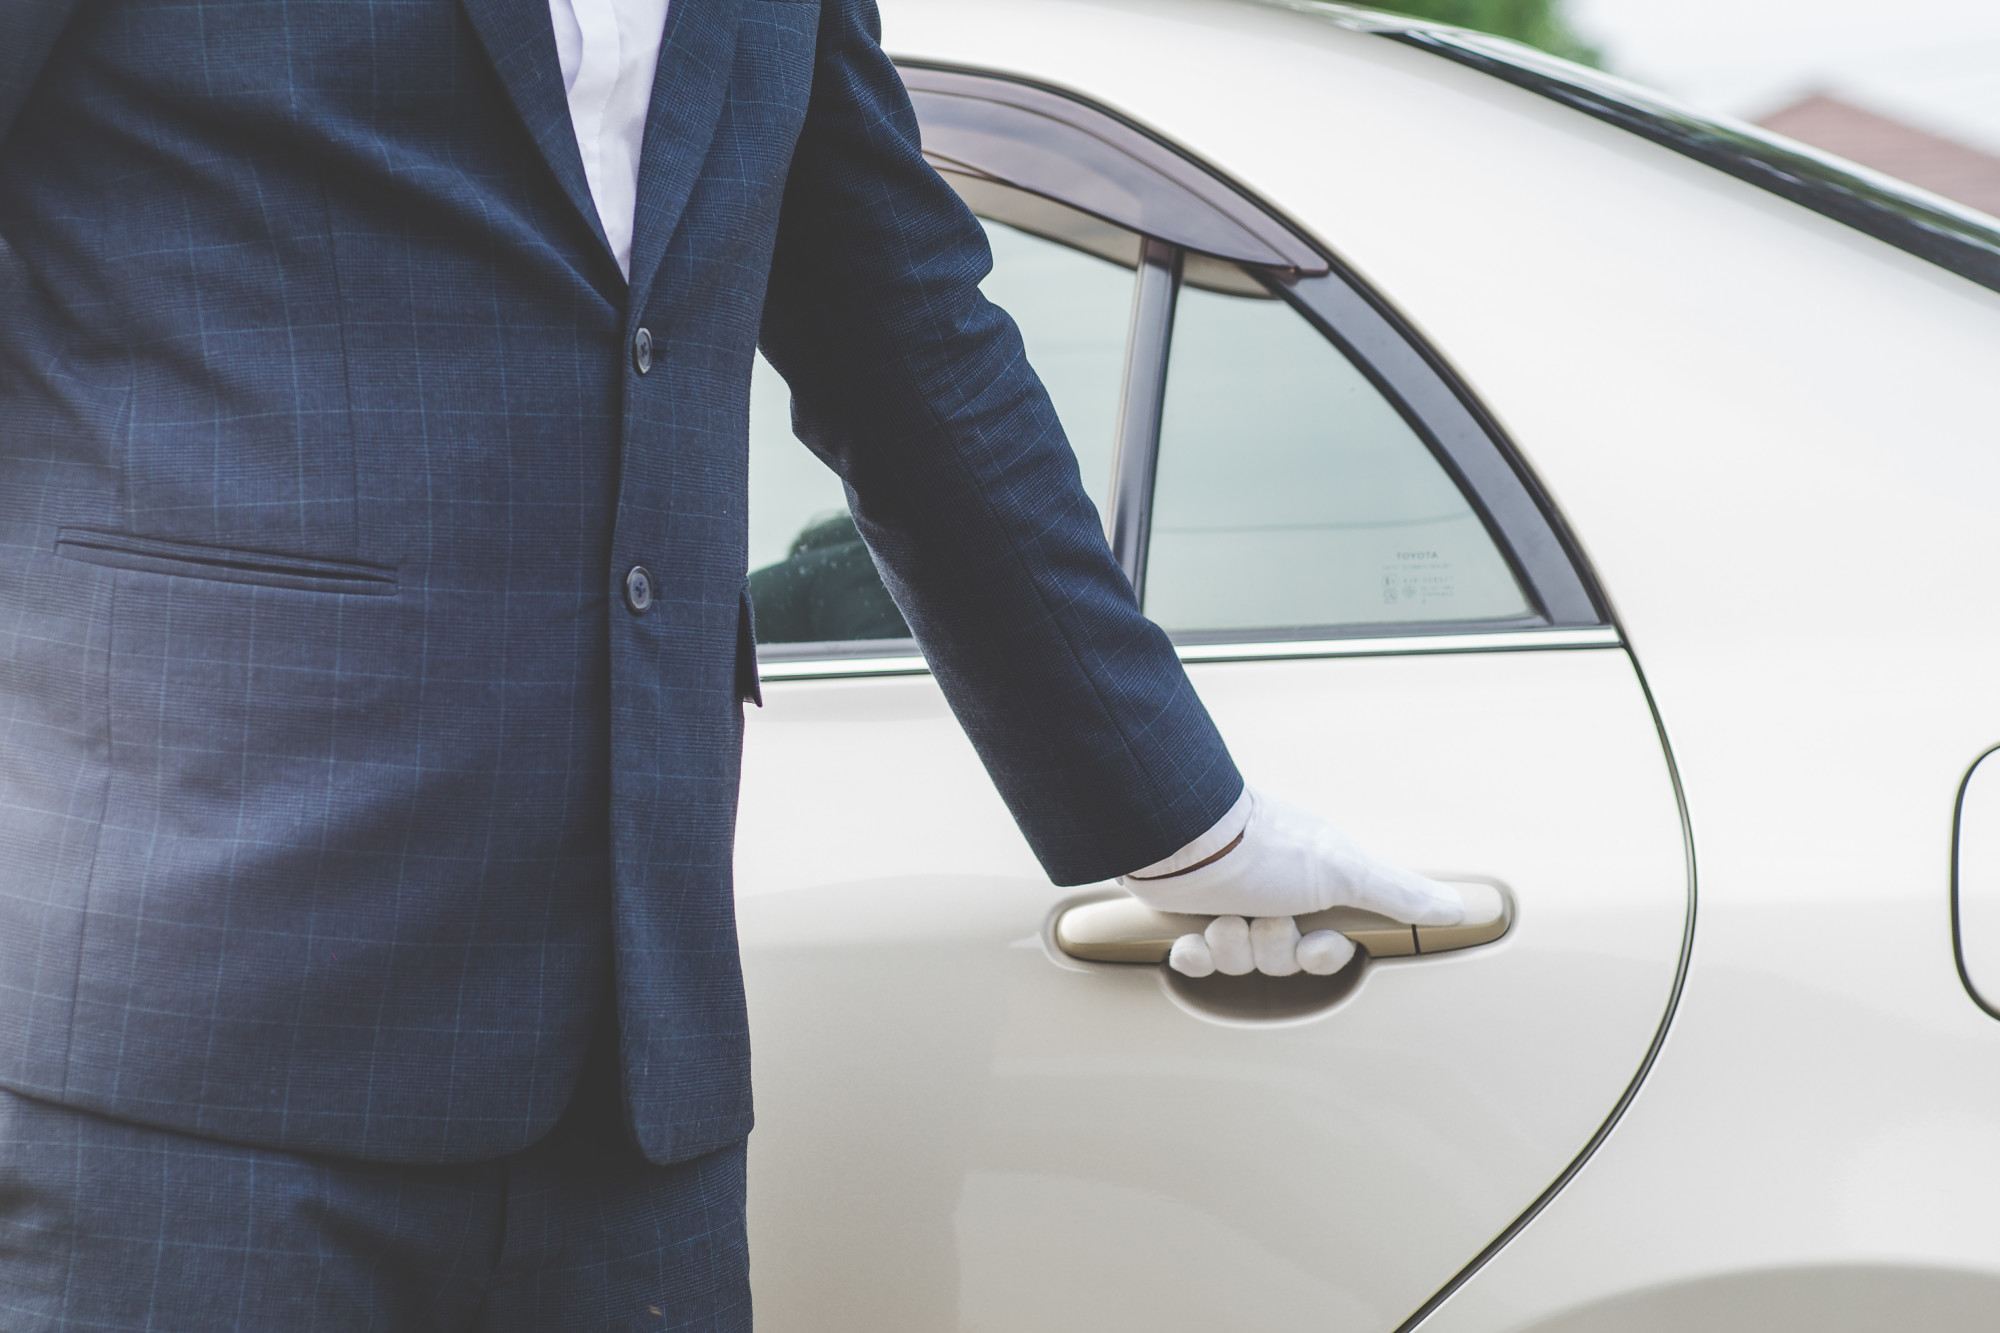 Car Chauffeured Services for Airport Transportation